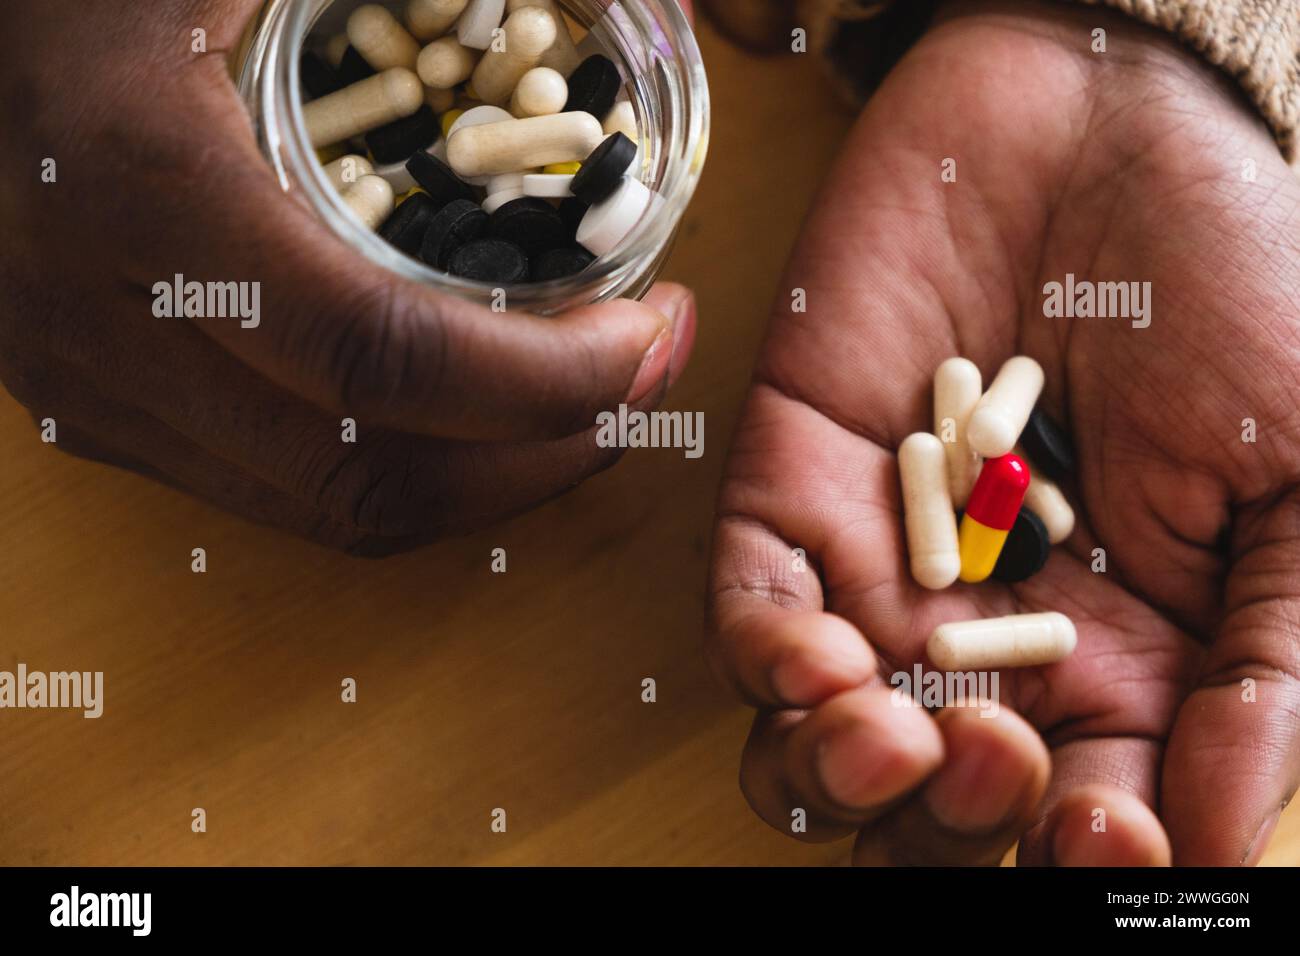 Close-up of the hands of an African man holding various capsules, portraying the daily routine of vitamin and medication consumption. Emphasizes health and wellness. Diverse Supplements in Hand Stock Photo